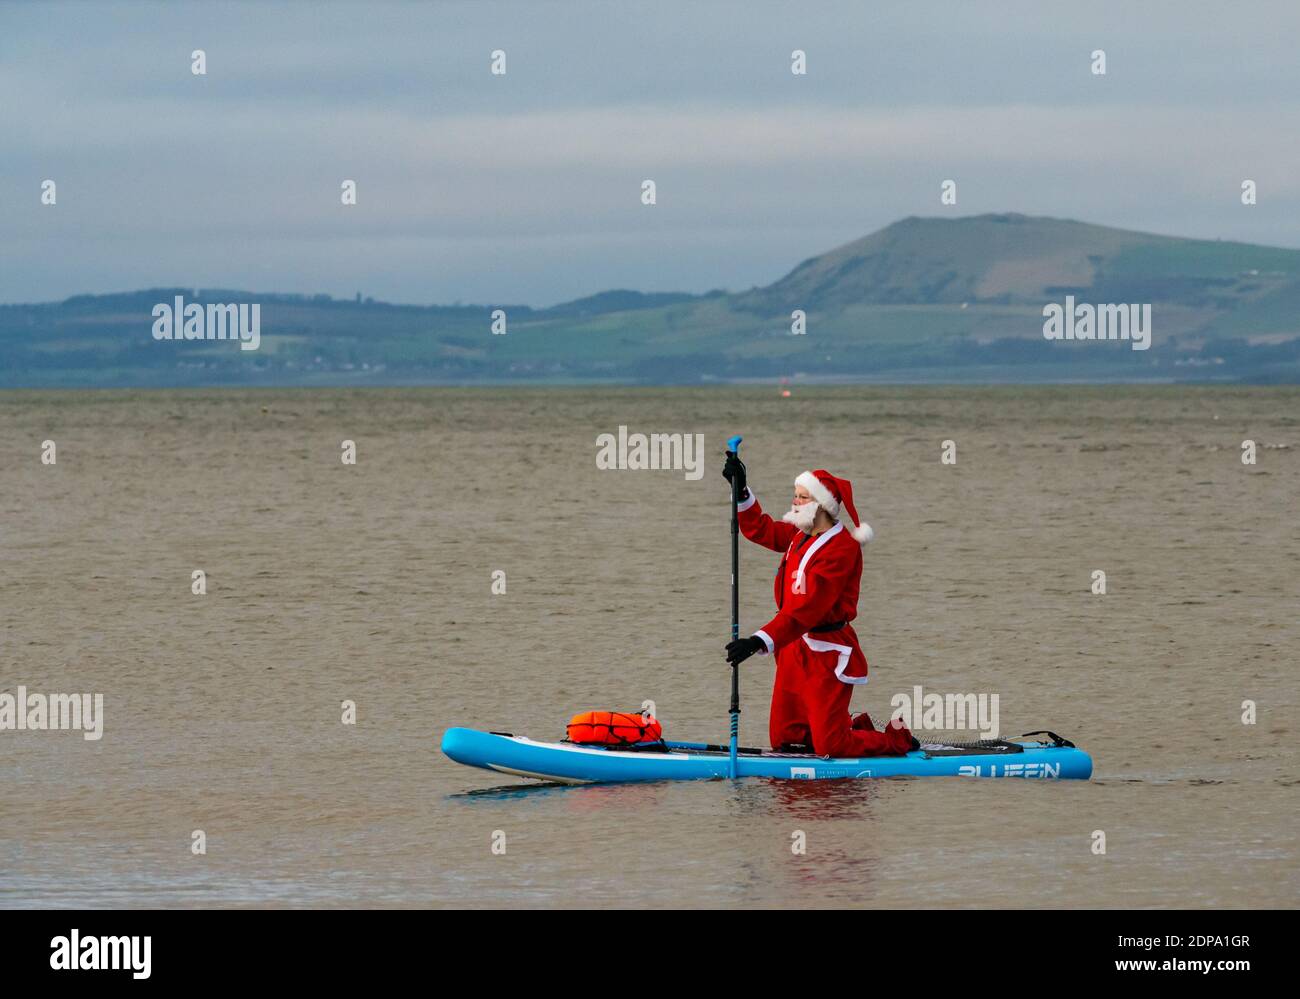 North Berwick, East Lothian, Scotland, United Kingdom, 19th December 2020. Paddle Boarding Santas for charity: a local community initiative by North Berwick News and Views called 'Christmas Cheer' raises over £5,000 funds for families in need. A paddle boarder dressed in a Santa costume Stock Photo